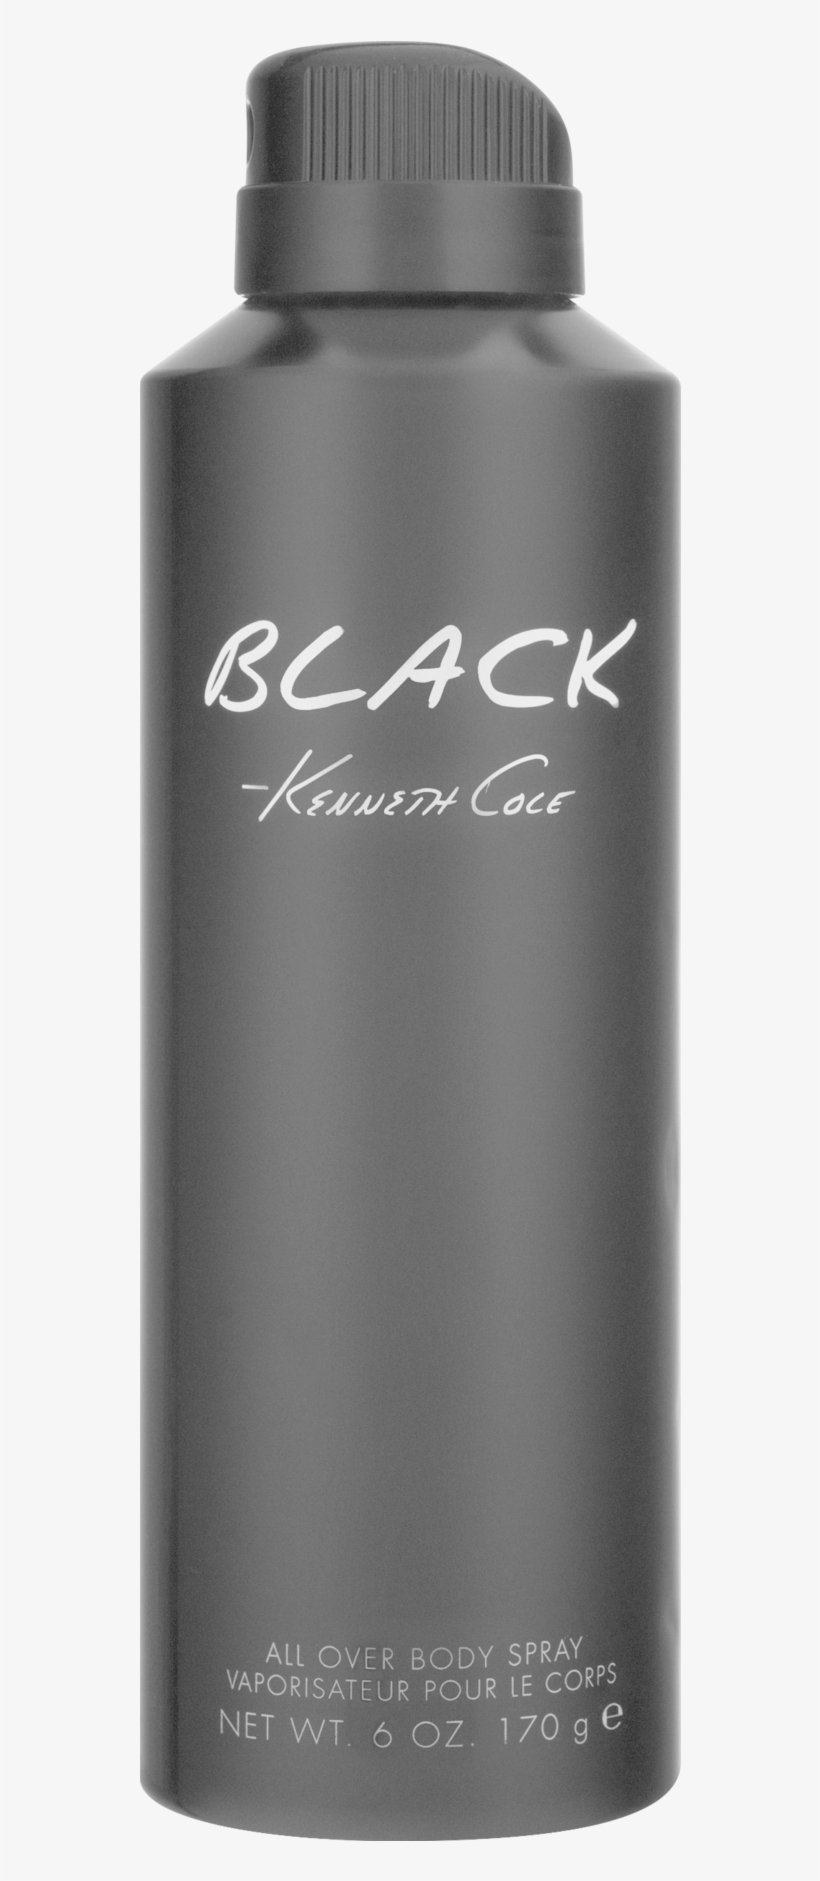 Kenneth Cole Black All Over Body Spray, - Kenneth Cole Black For Men Edt Spray .5 Oz By Kenneth, transparent png #911447